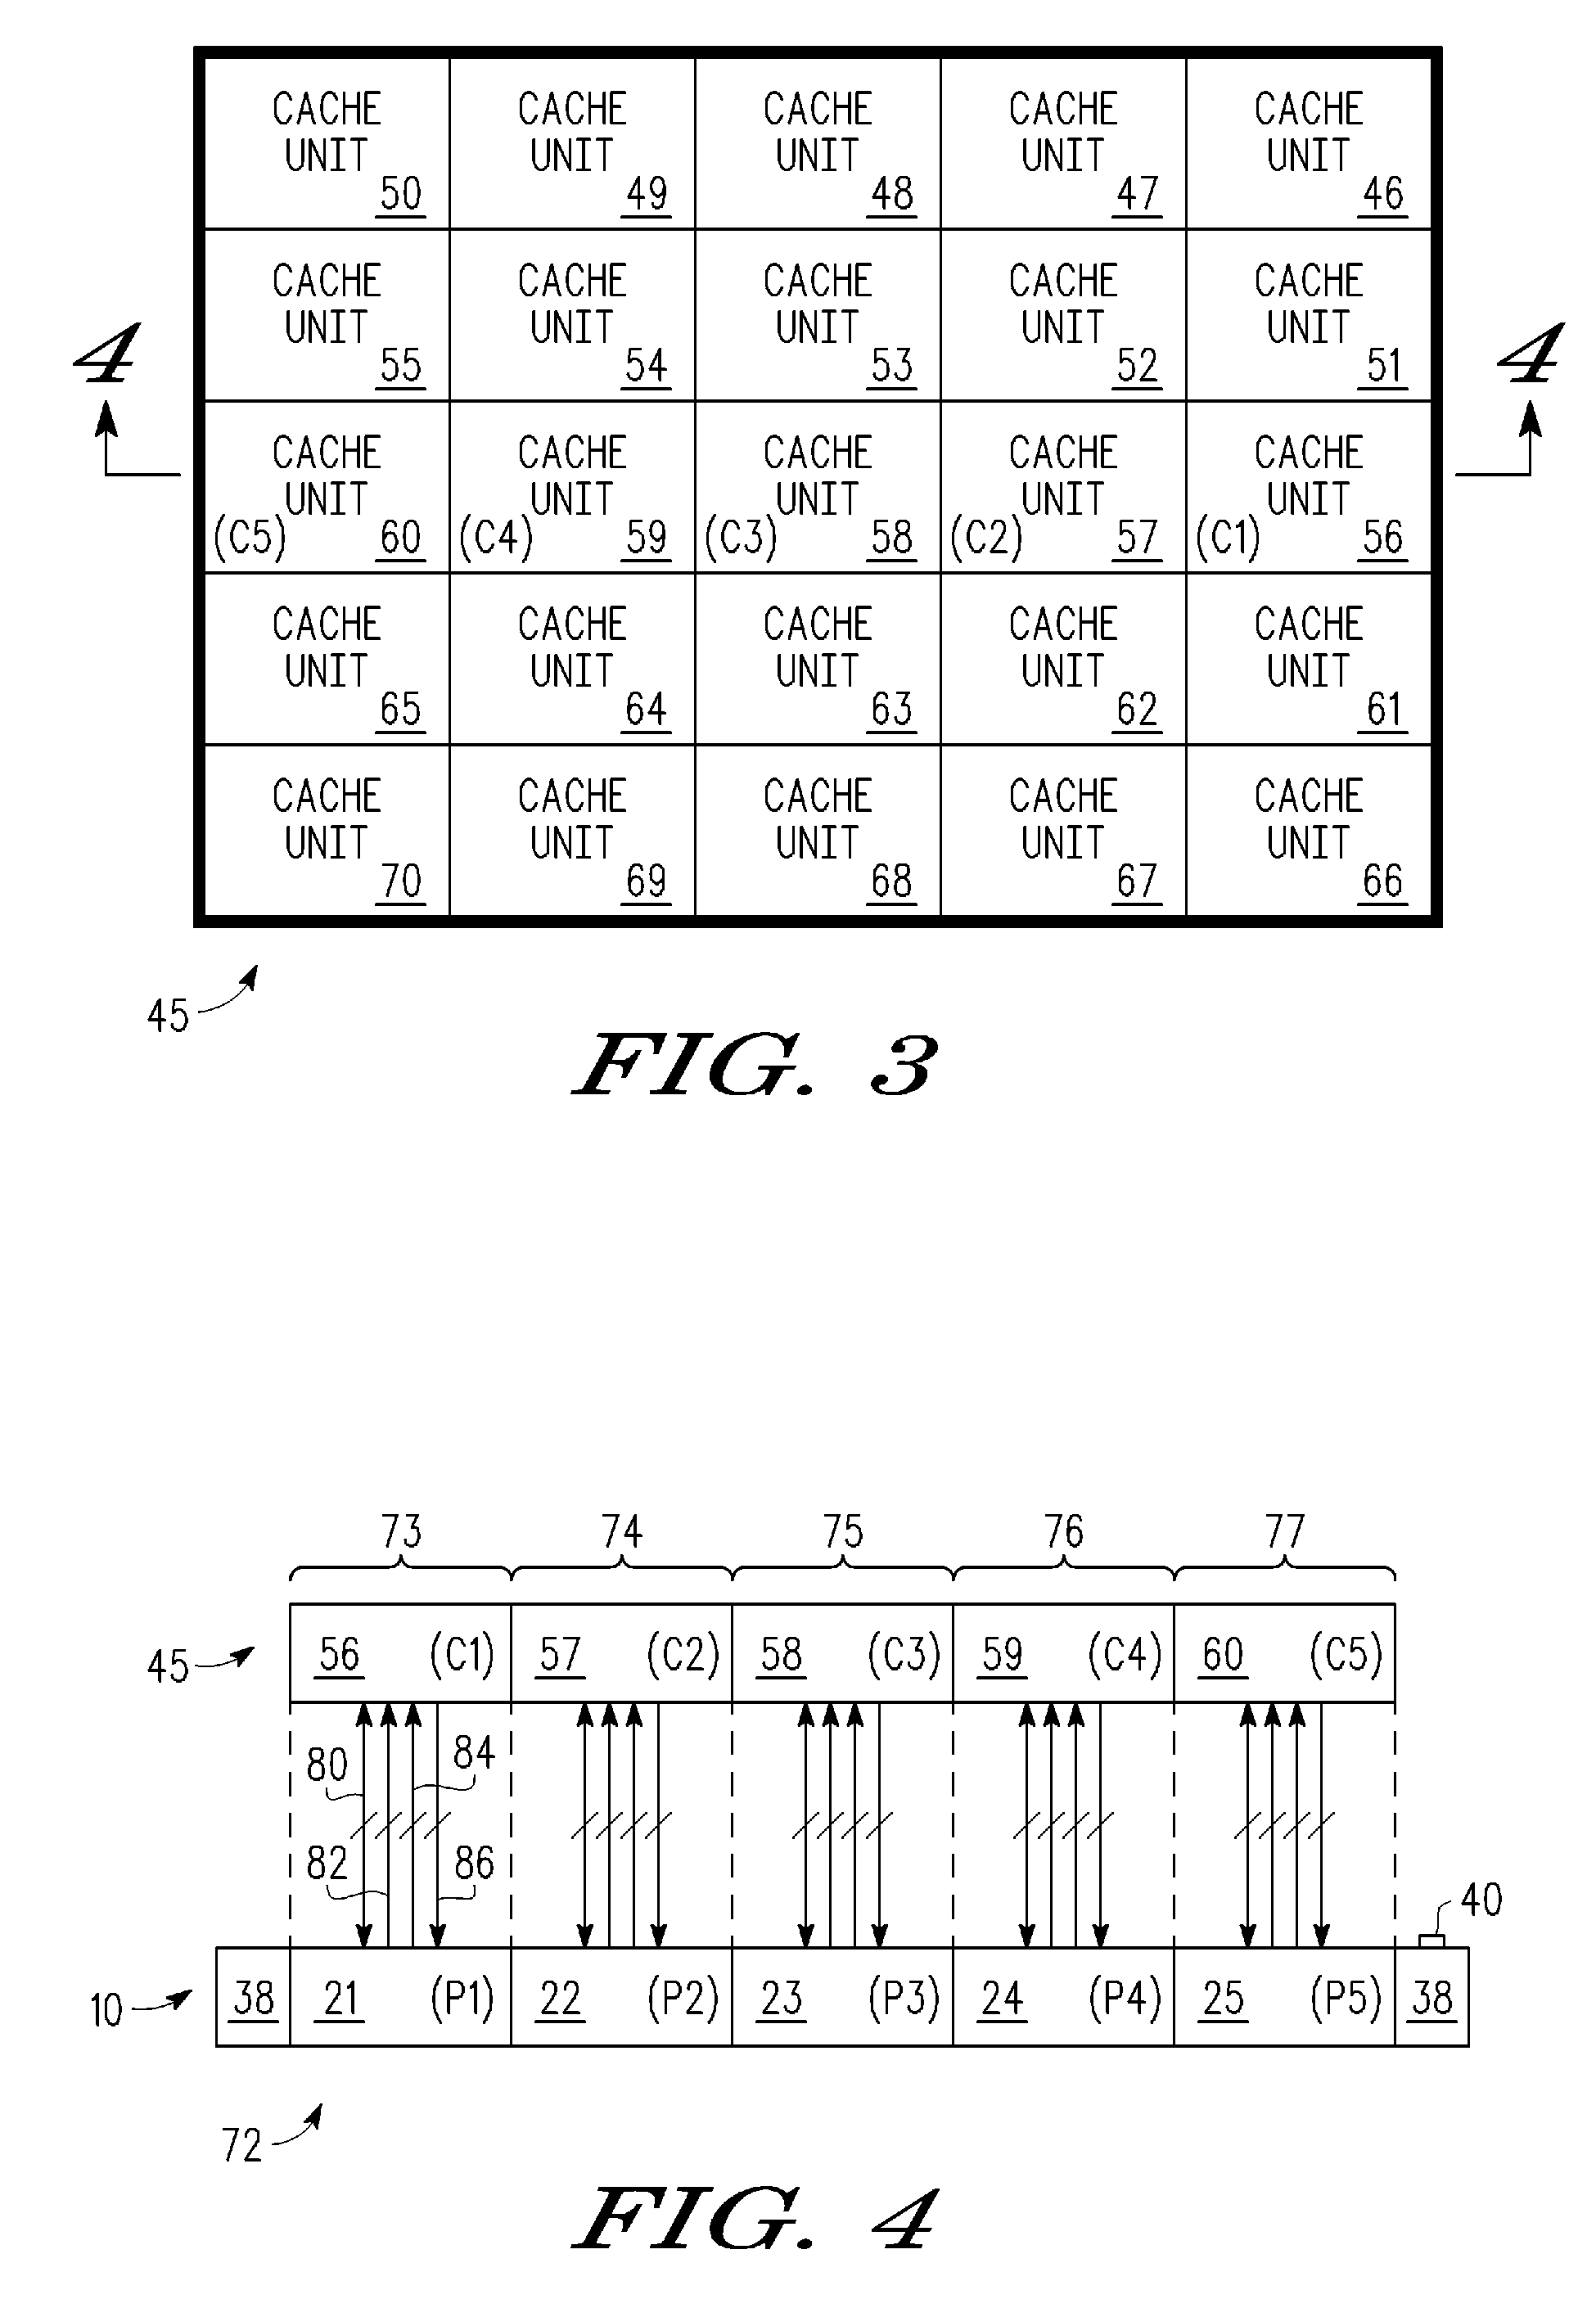 High bandwidth cache-to-processing unit communication in a multiple processor/cache system